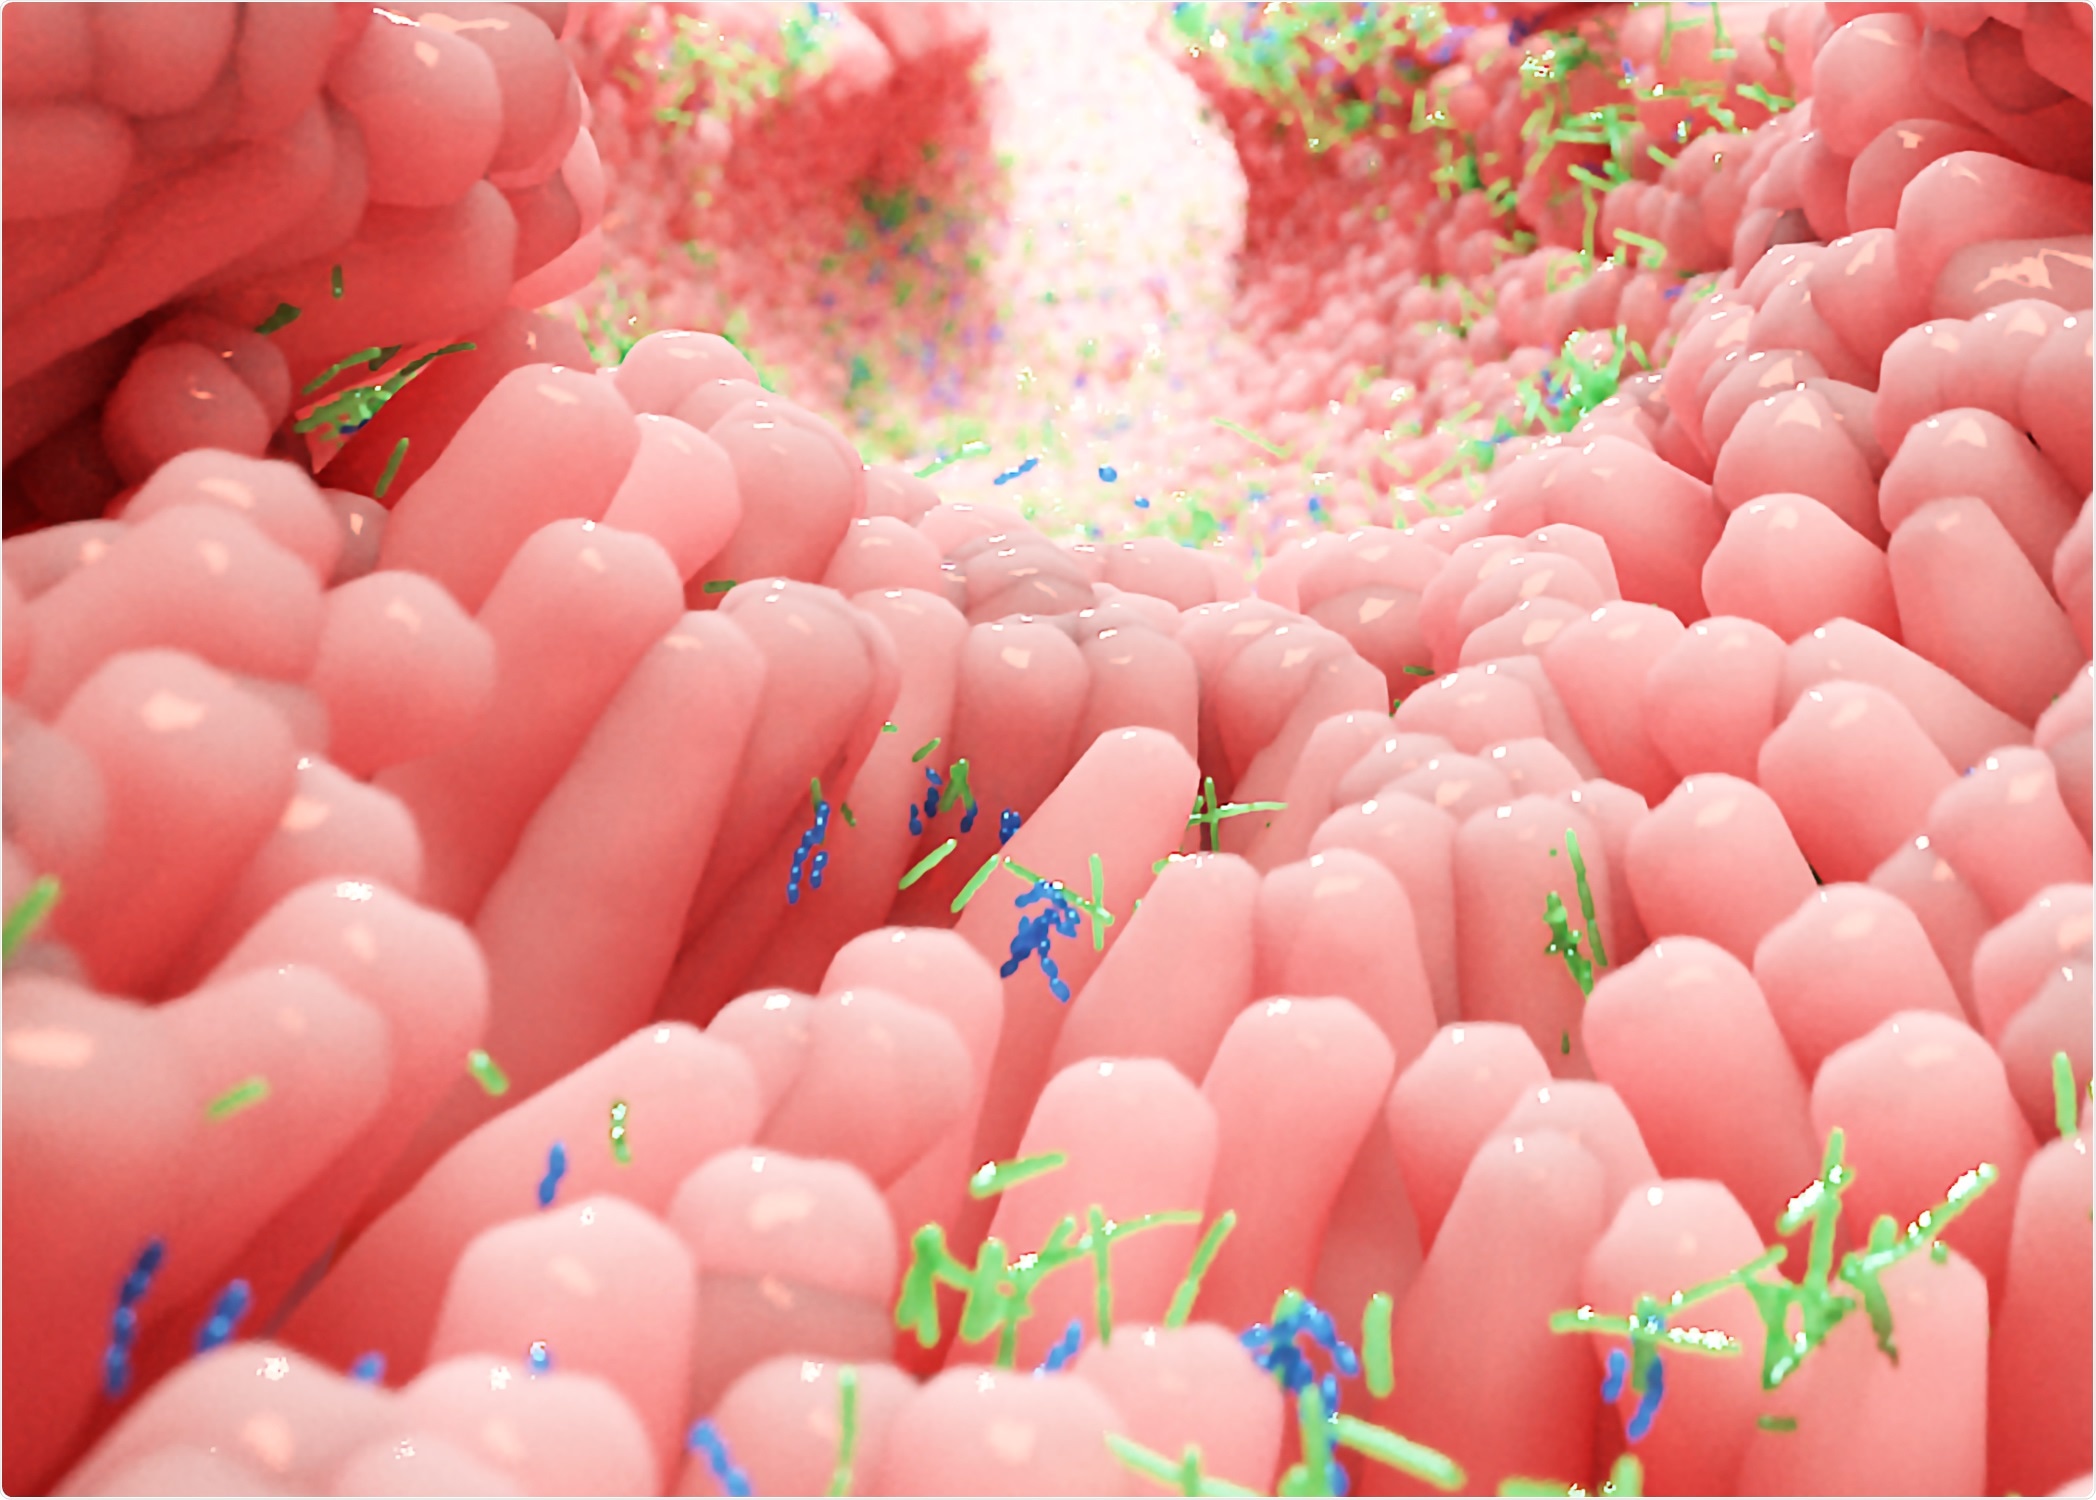 Study: Gut Bacterial Dysbiosis and Instability is Associated with the Onset of Complications and Mortality in COVID-19. Image Credit: Alpha Tauri 3D Graphics / Shutterstock